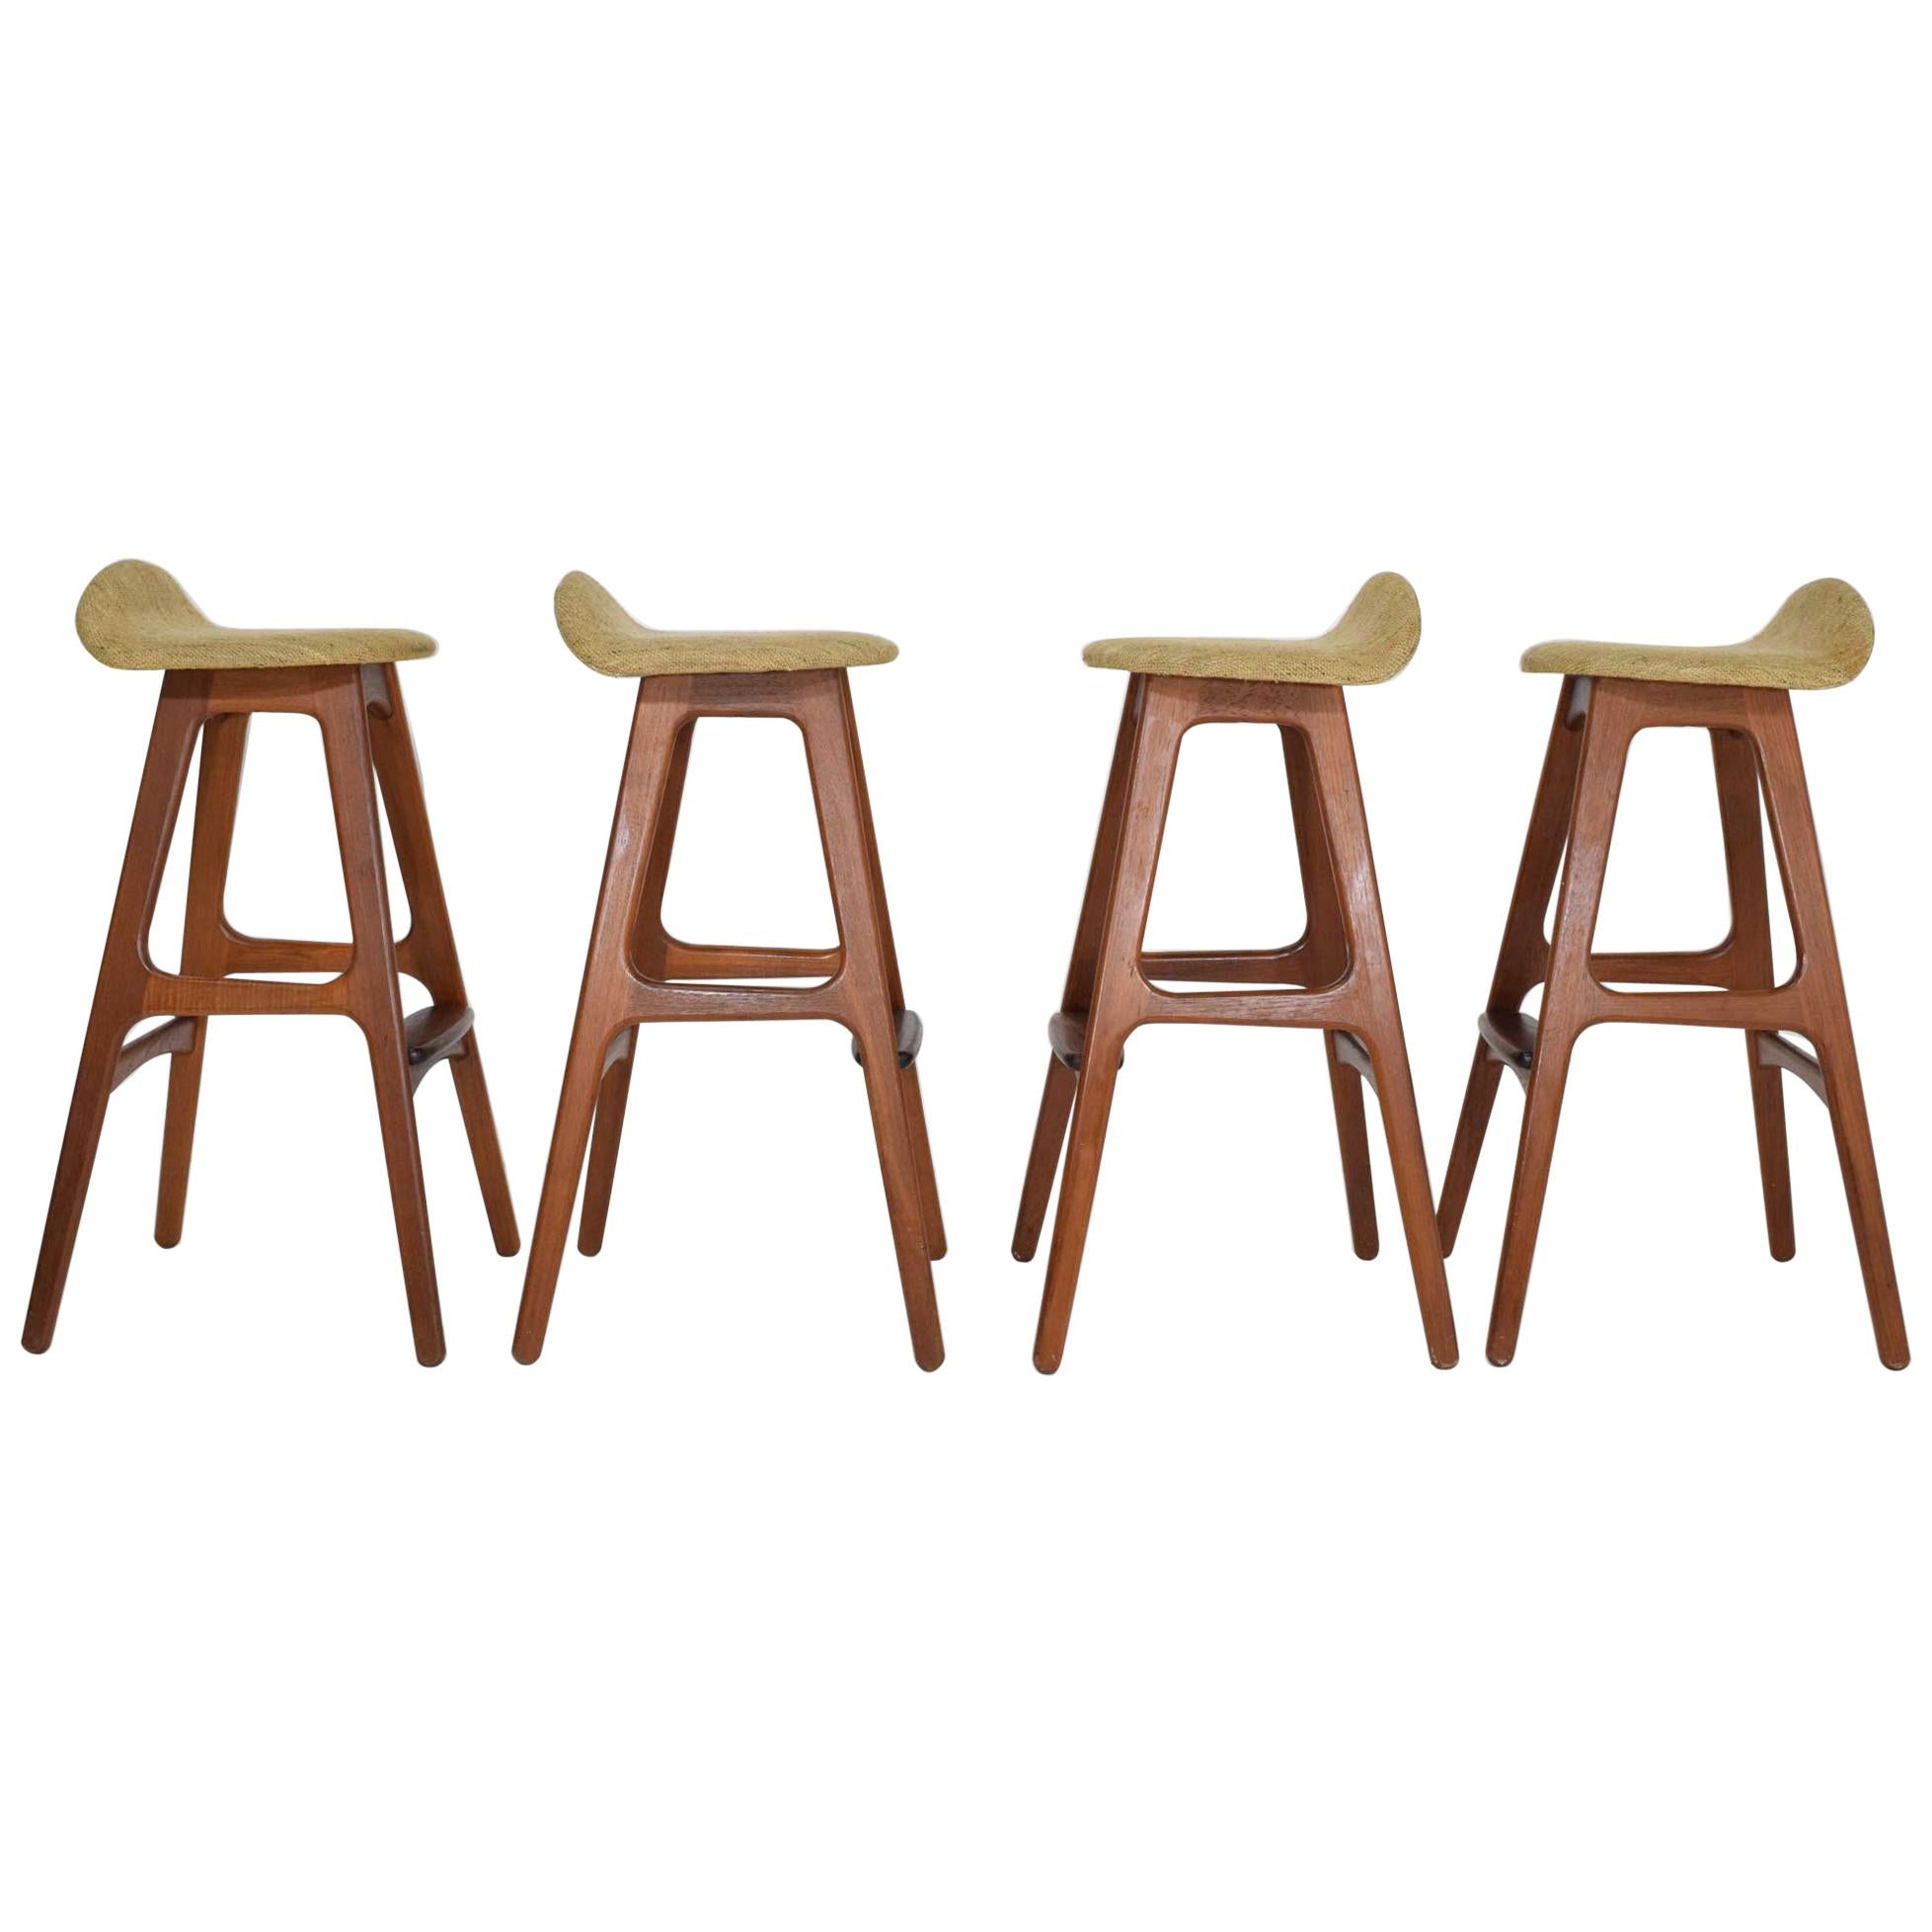 Four Bar Stools, Model OD61, Designed by Erik Buch and Manufactured by Odense